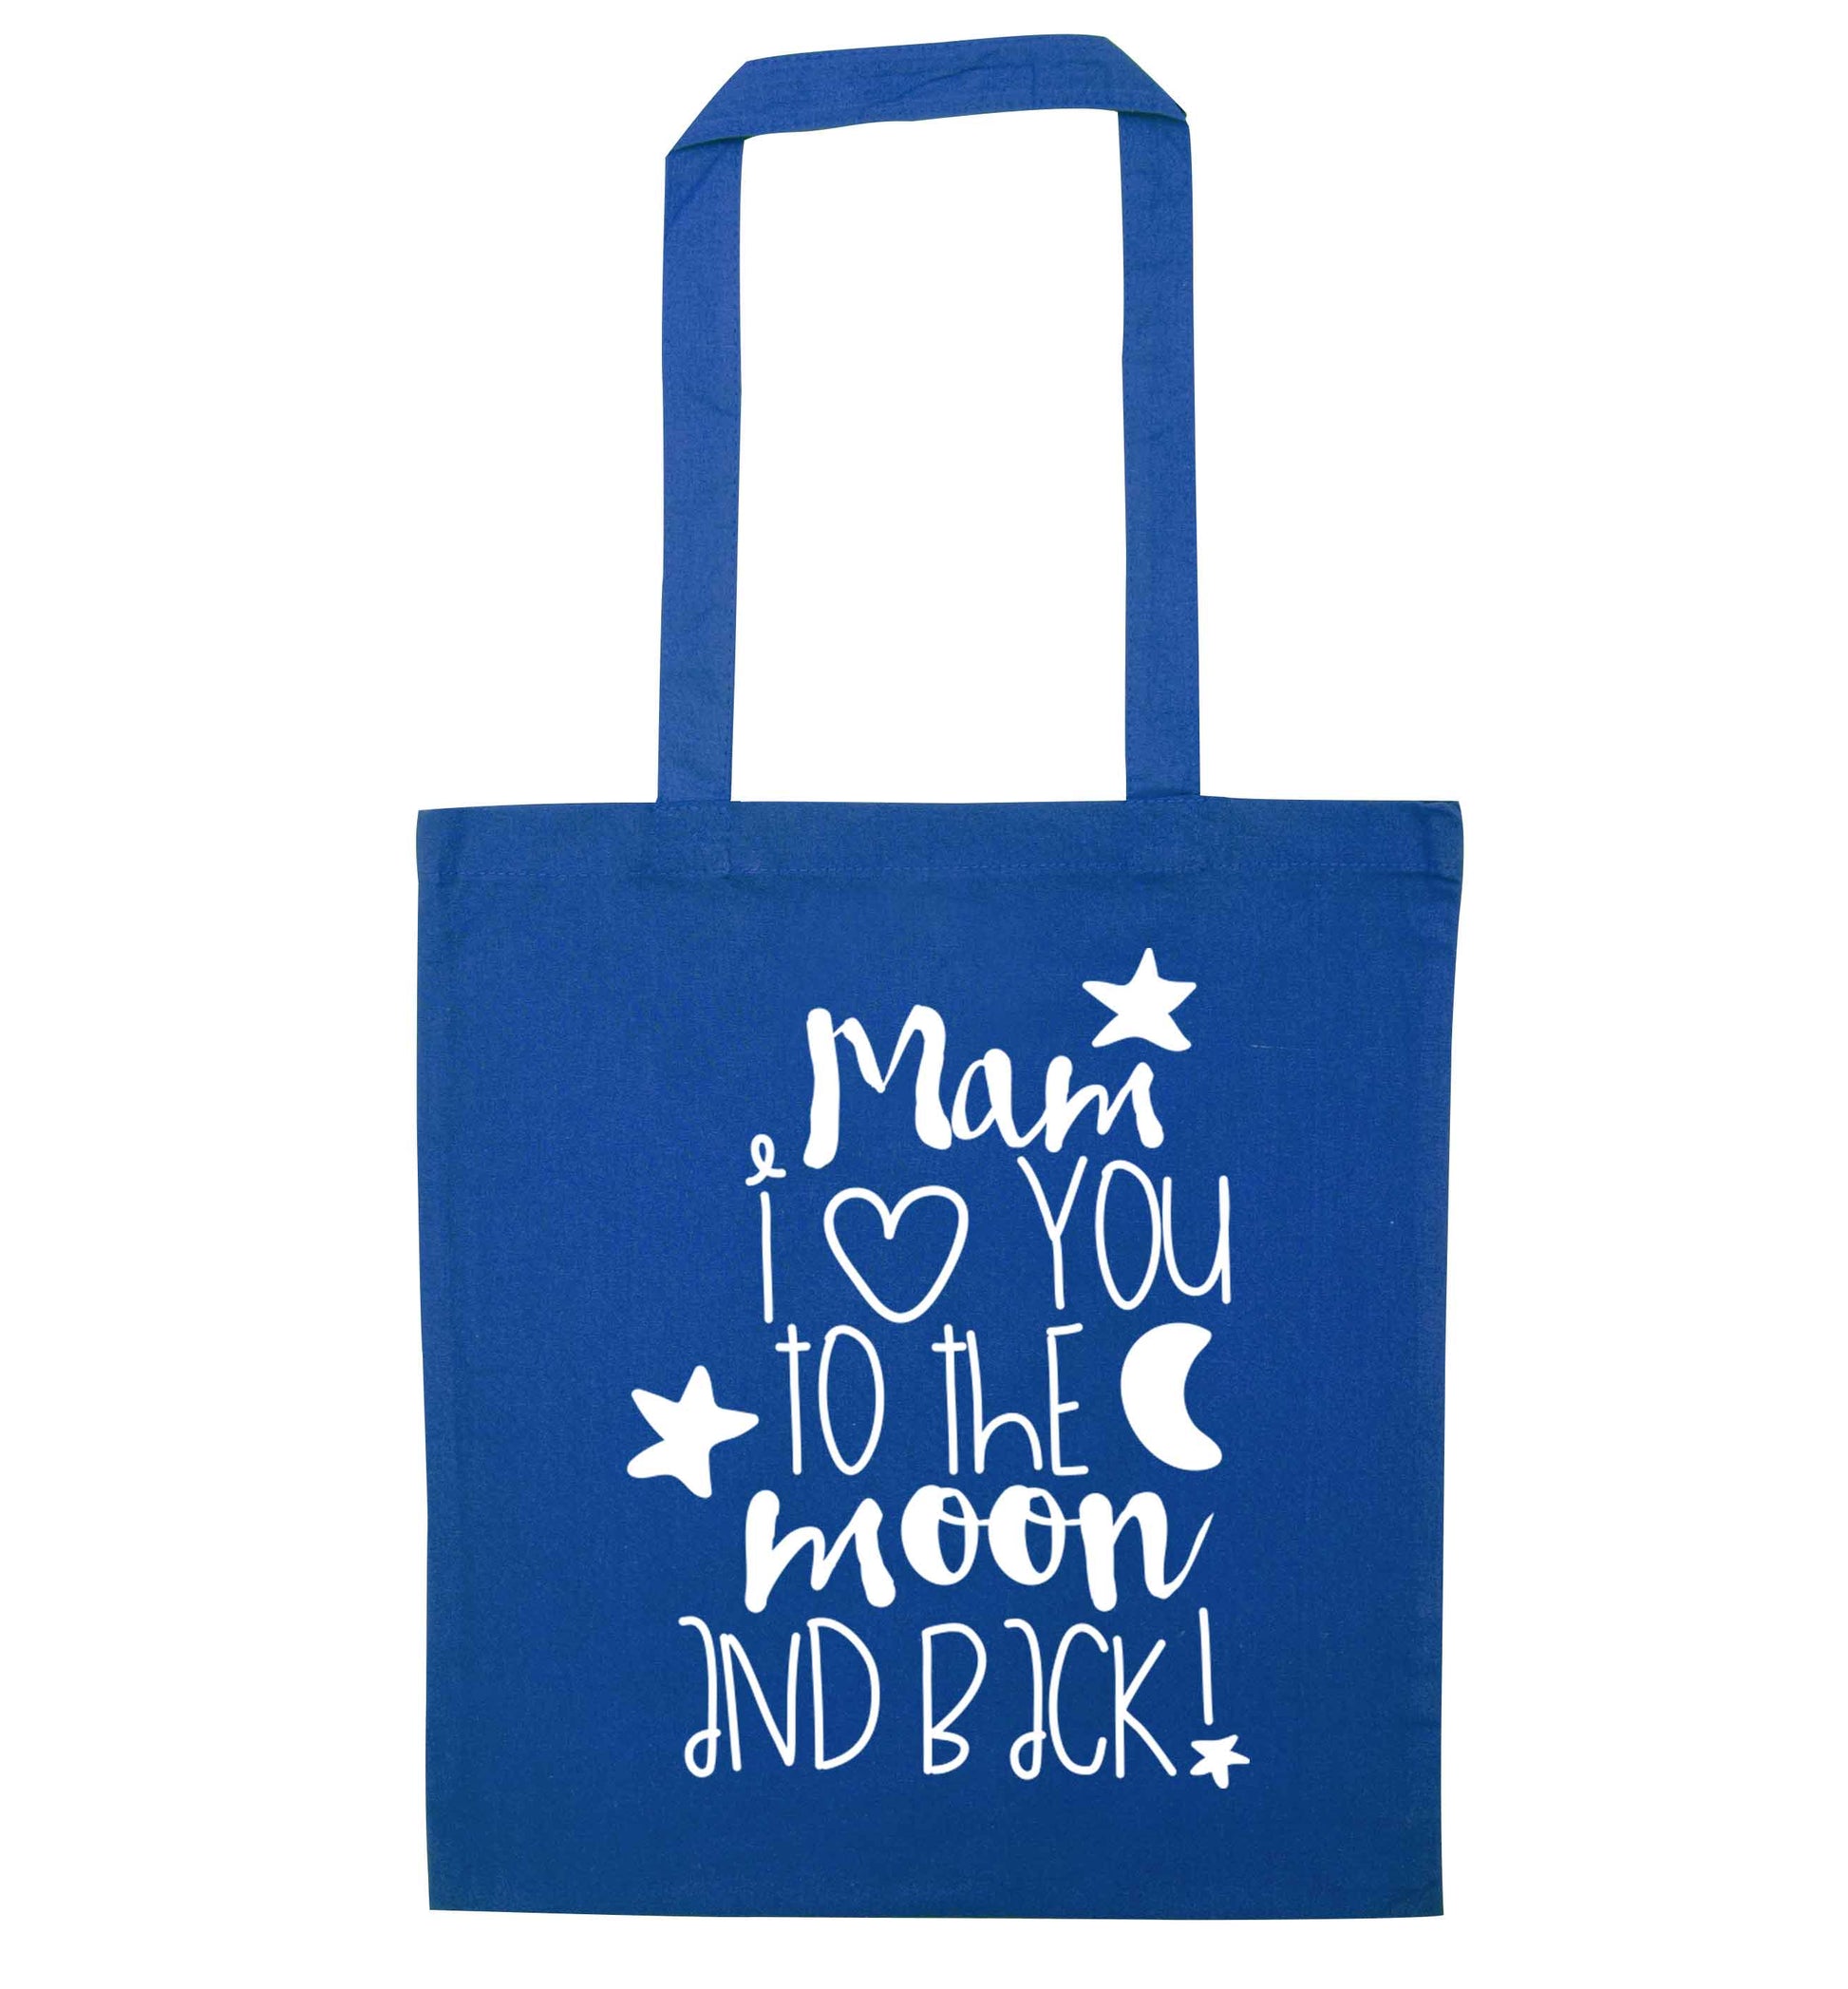 Mam I love you to the moon and back blue tote bag